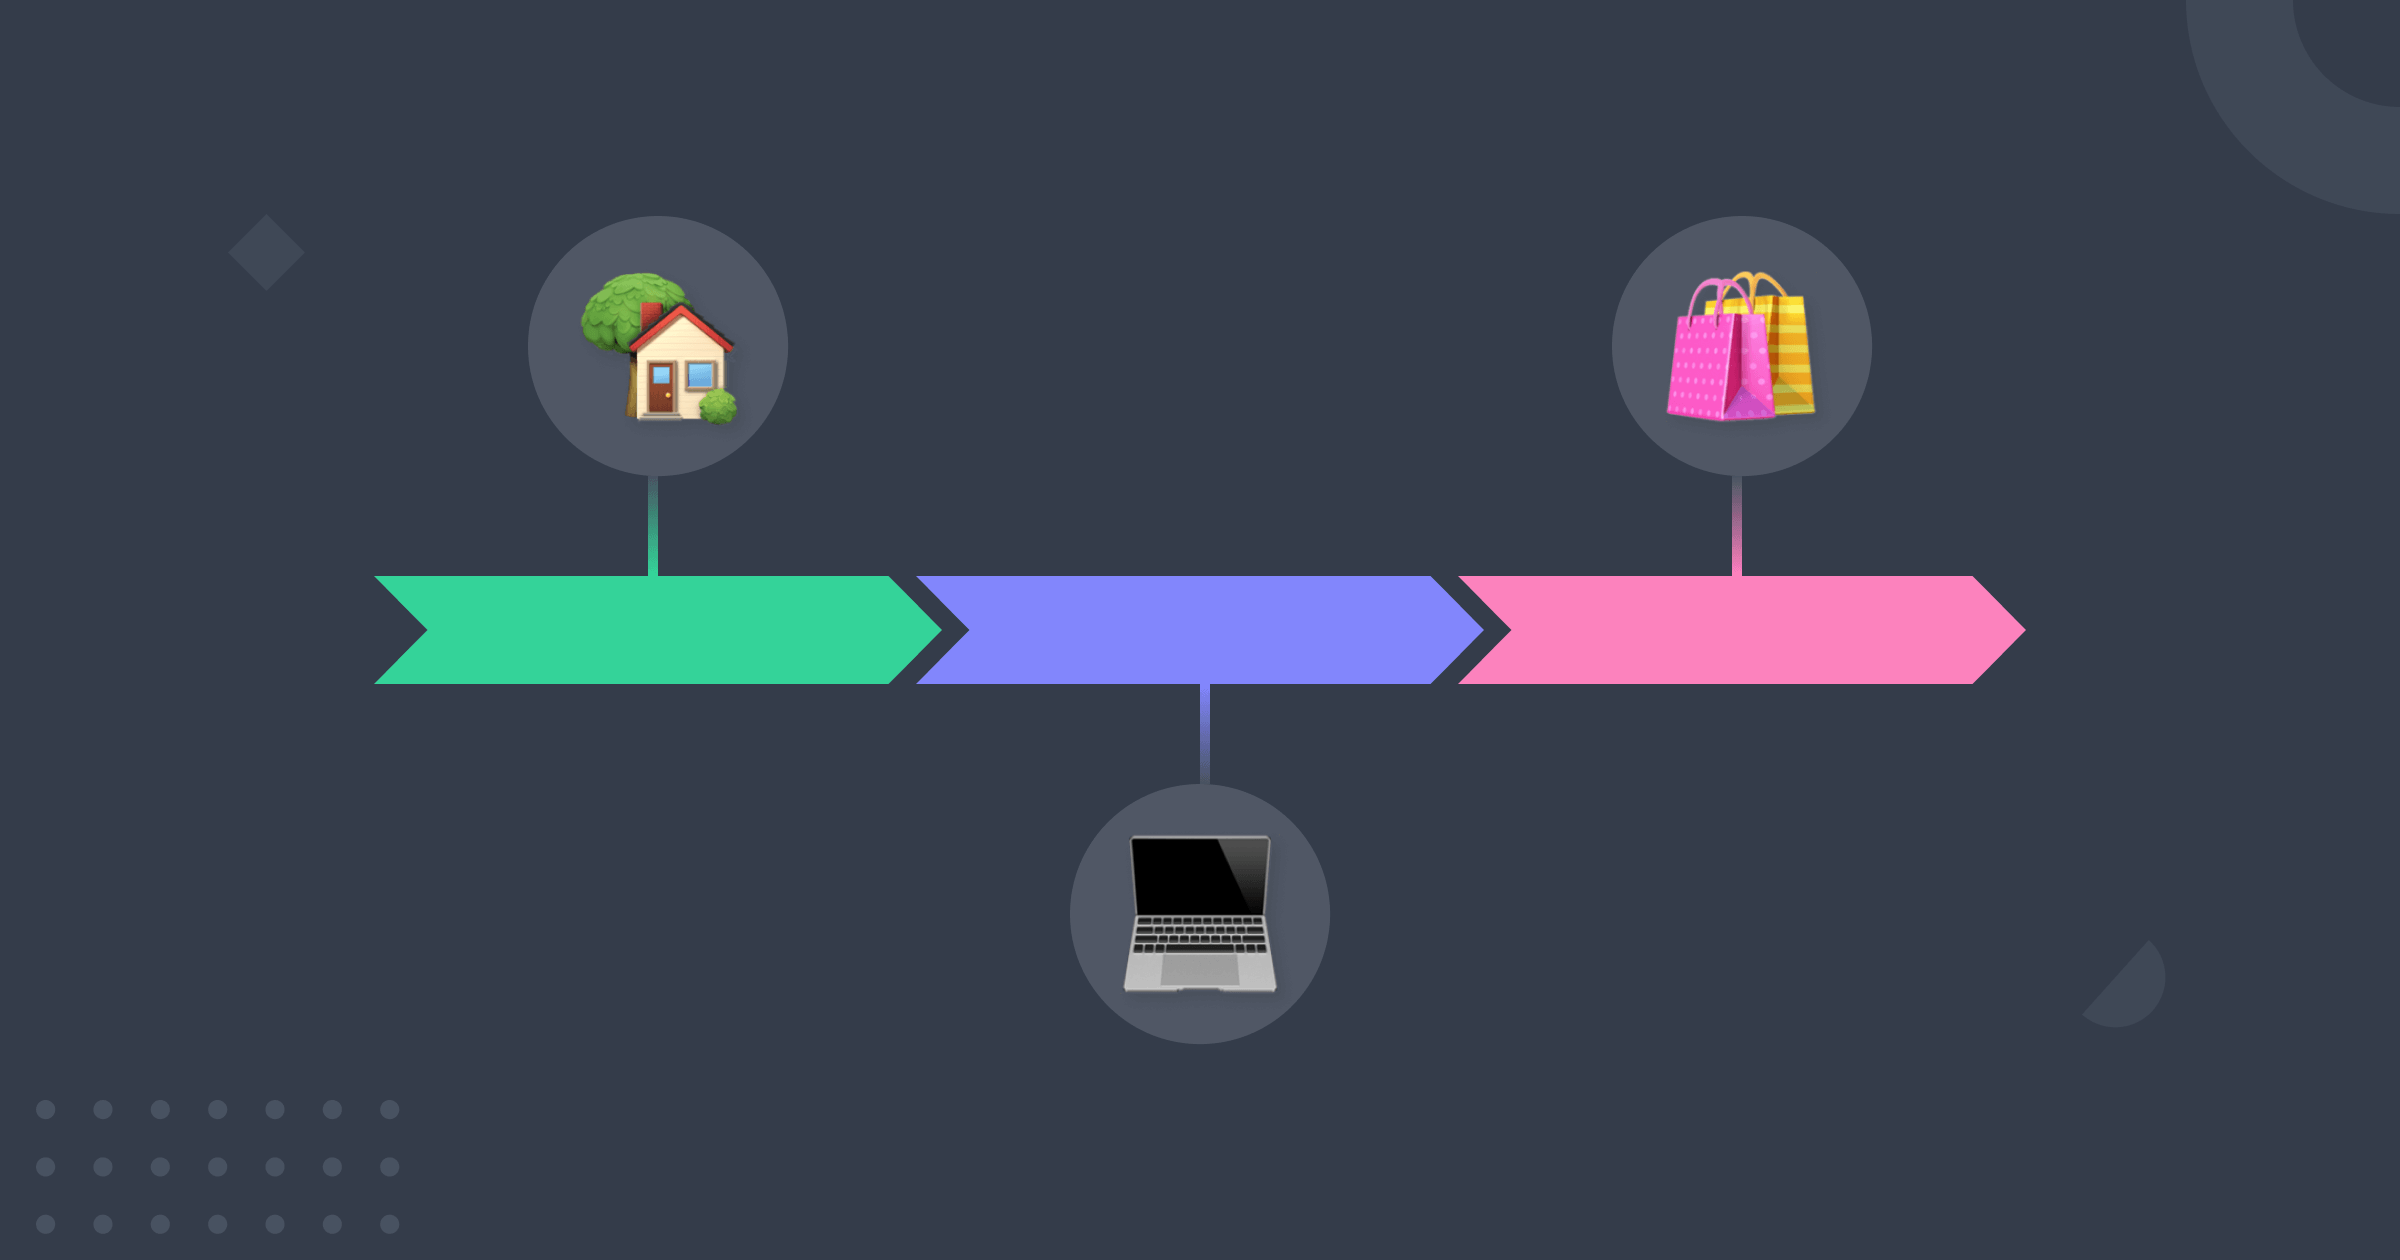 A flowchart linked to a house emoji, a laptop emoji, and a sales bags emoji represents different touch points of the user buying journey.